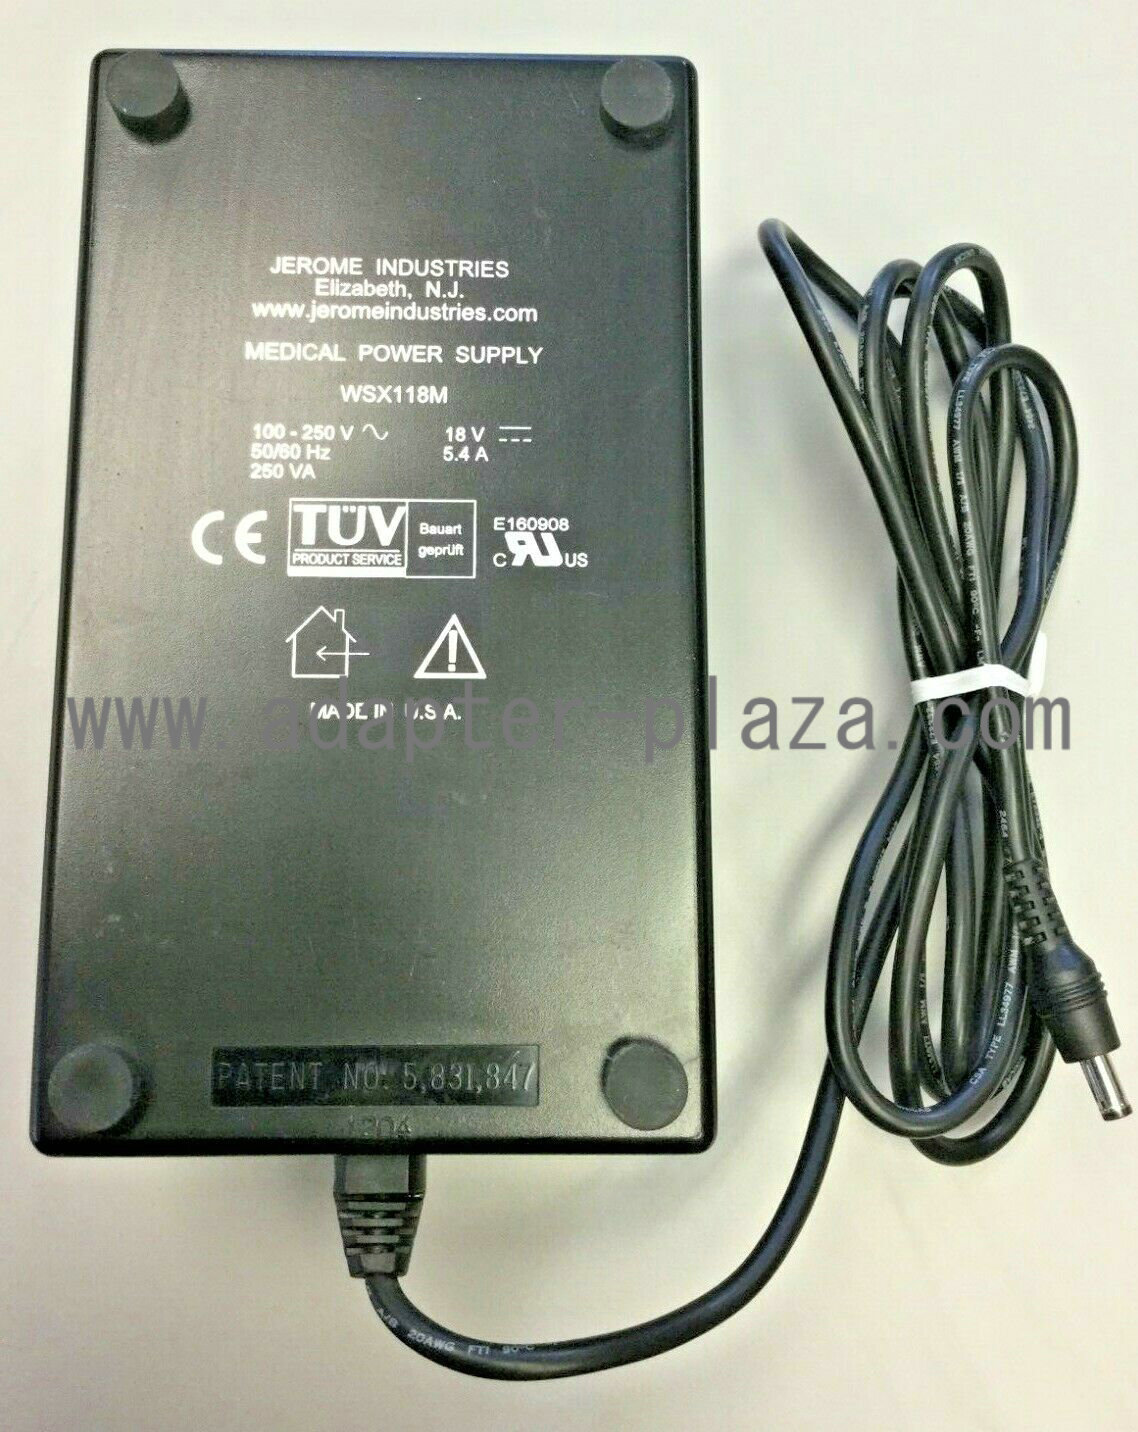 New Jerome Industries WSX118M 18VDC 5.4A Medical Power Supply for Laptop